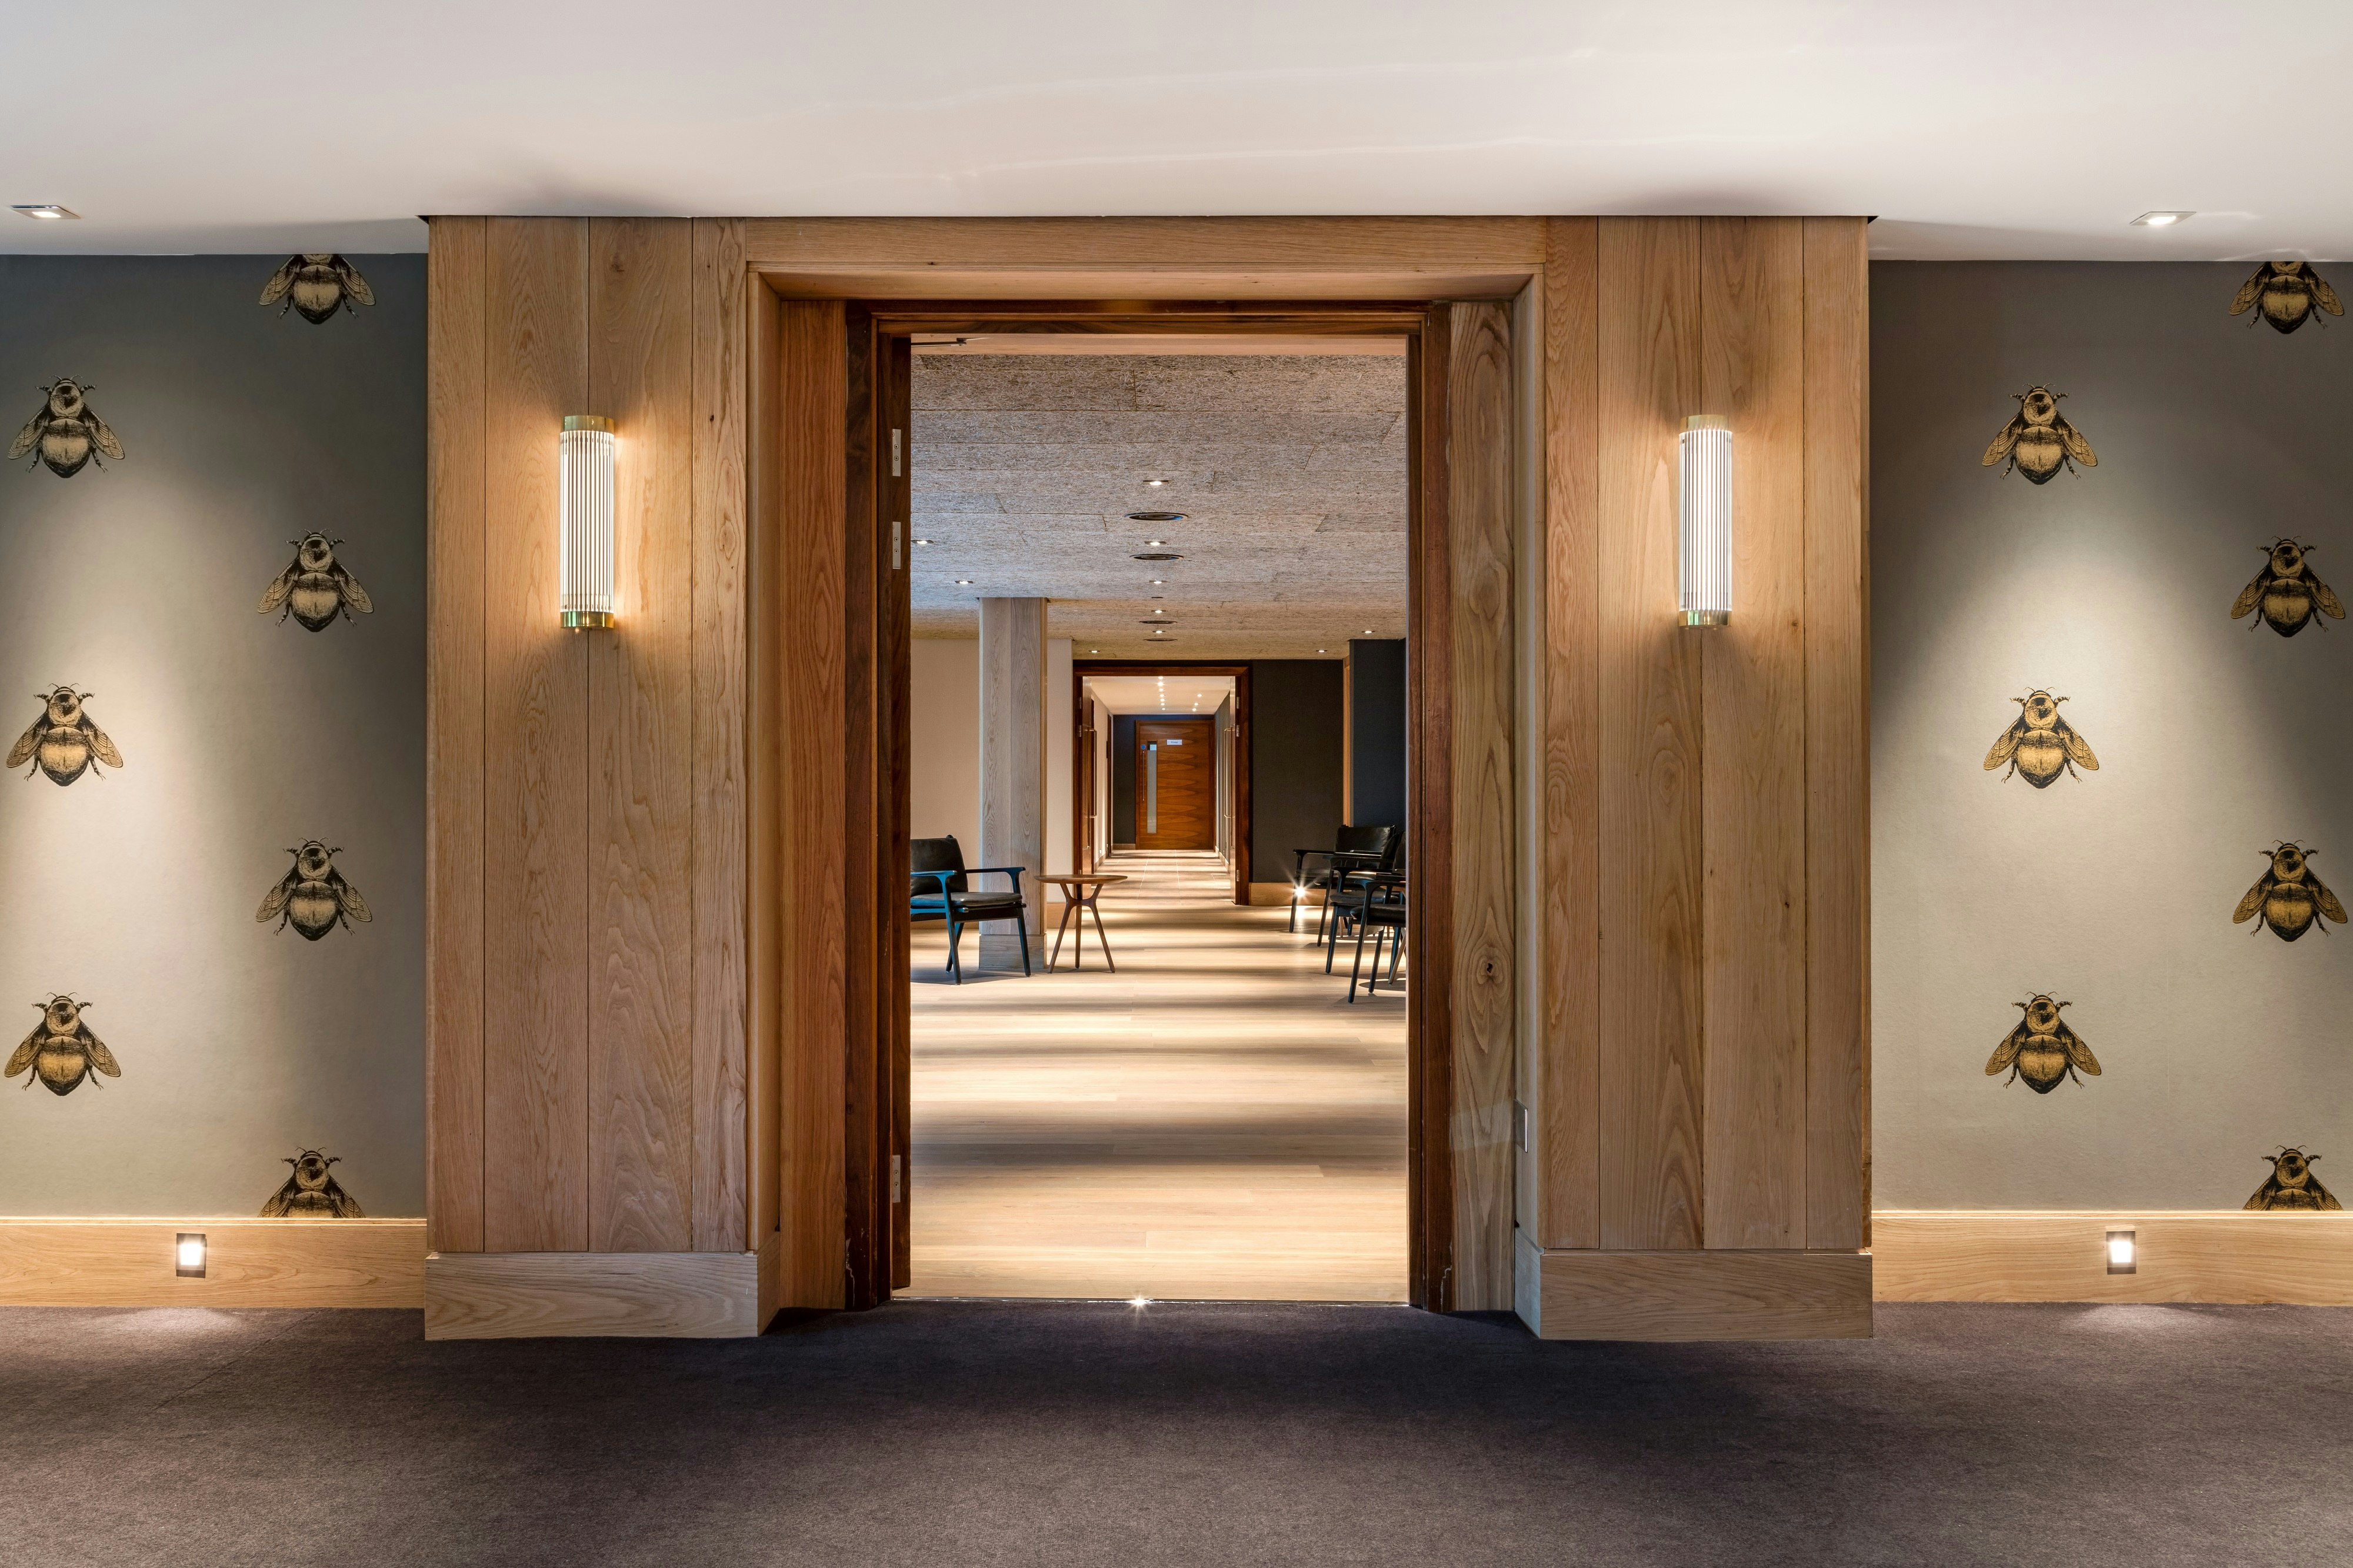 Meeting Rooms Venues in Manchester - The Edwardian Manchester, A Radisson Collection Hotel